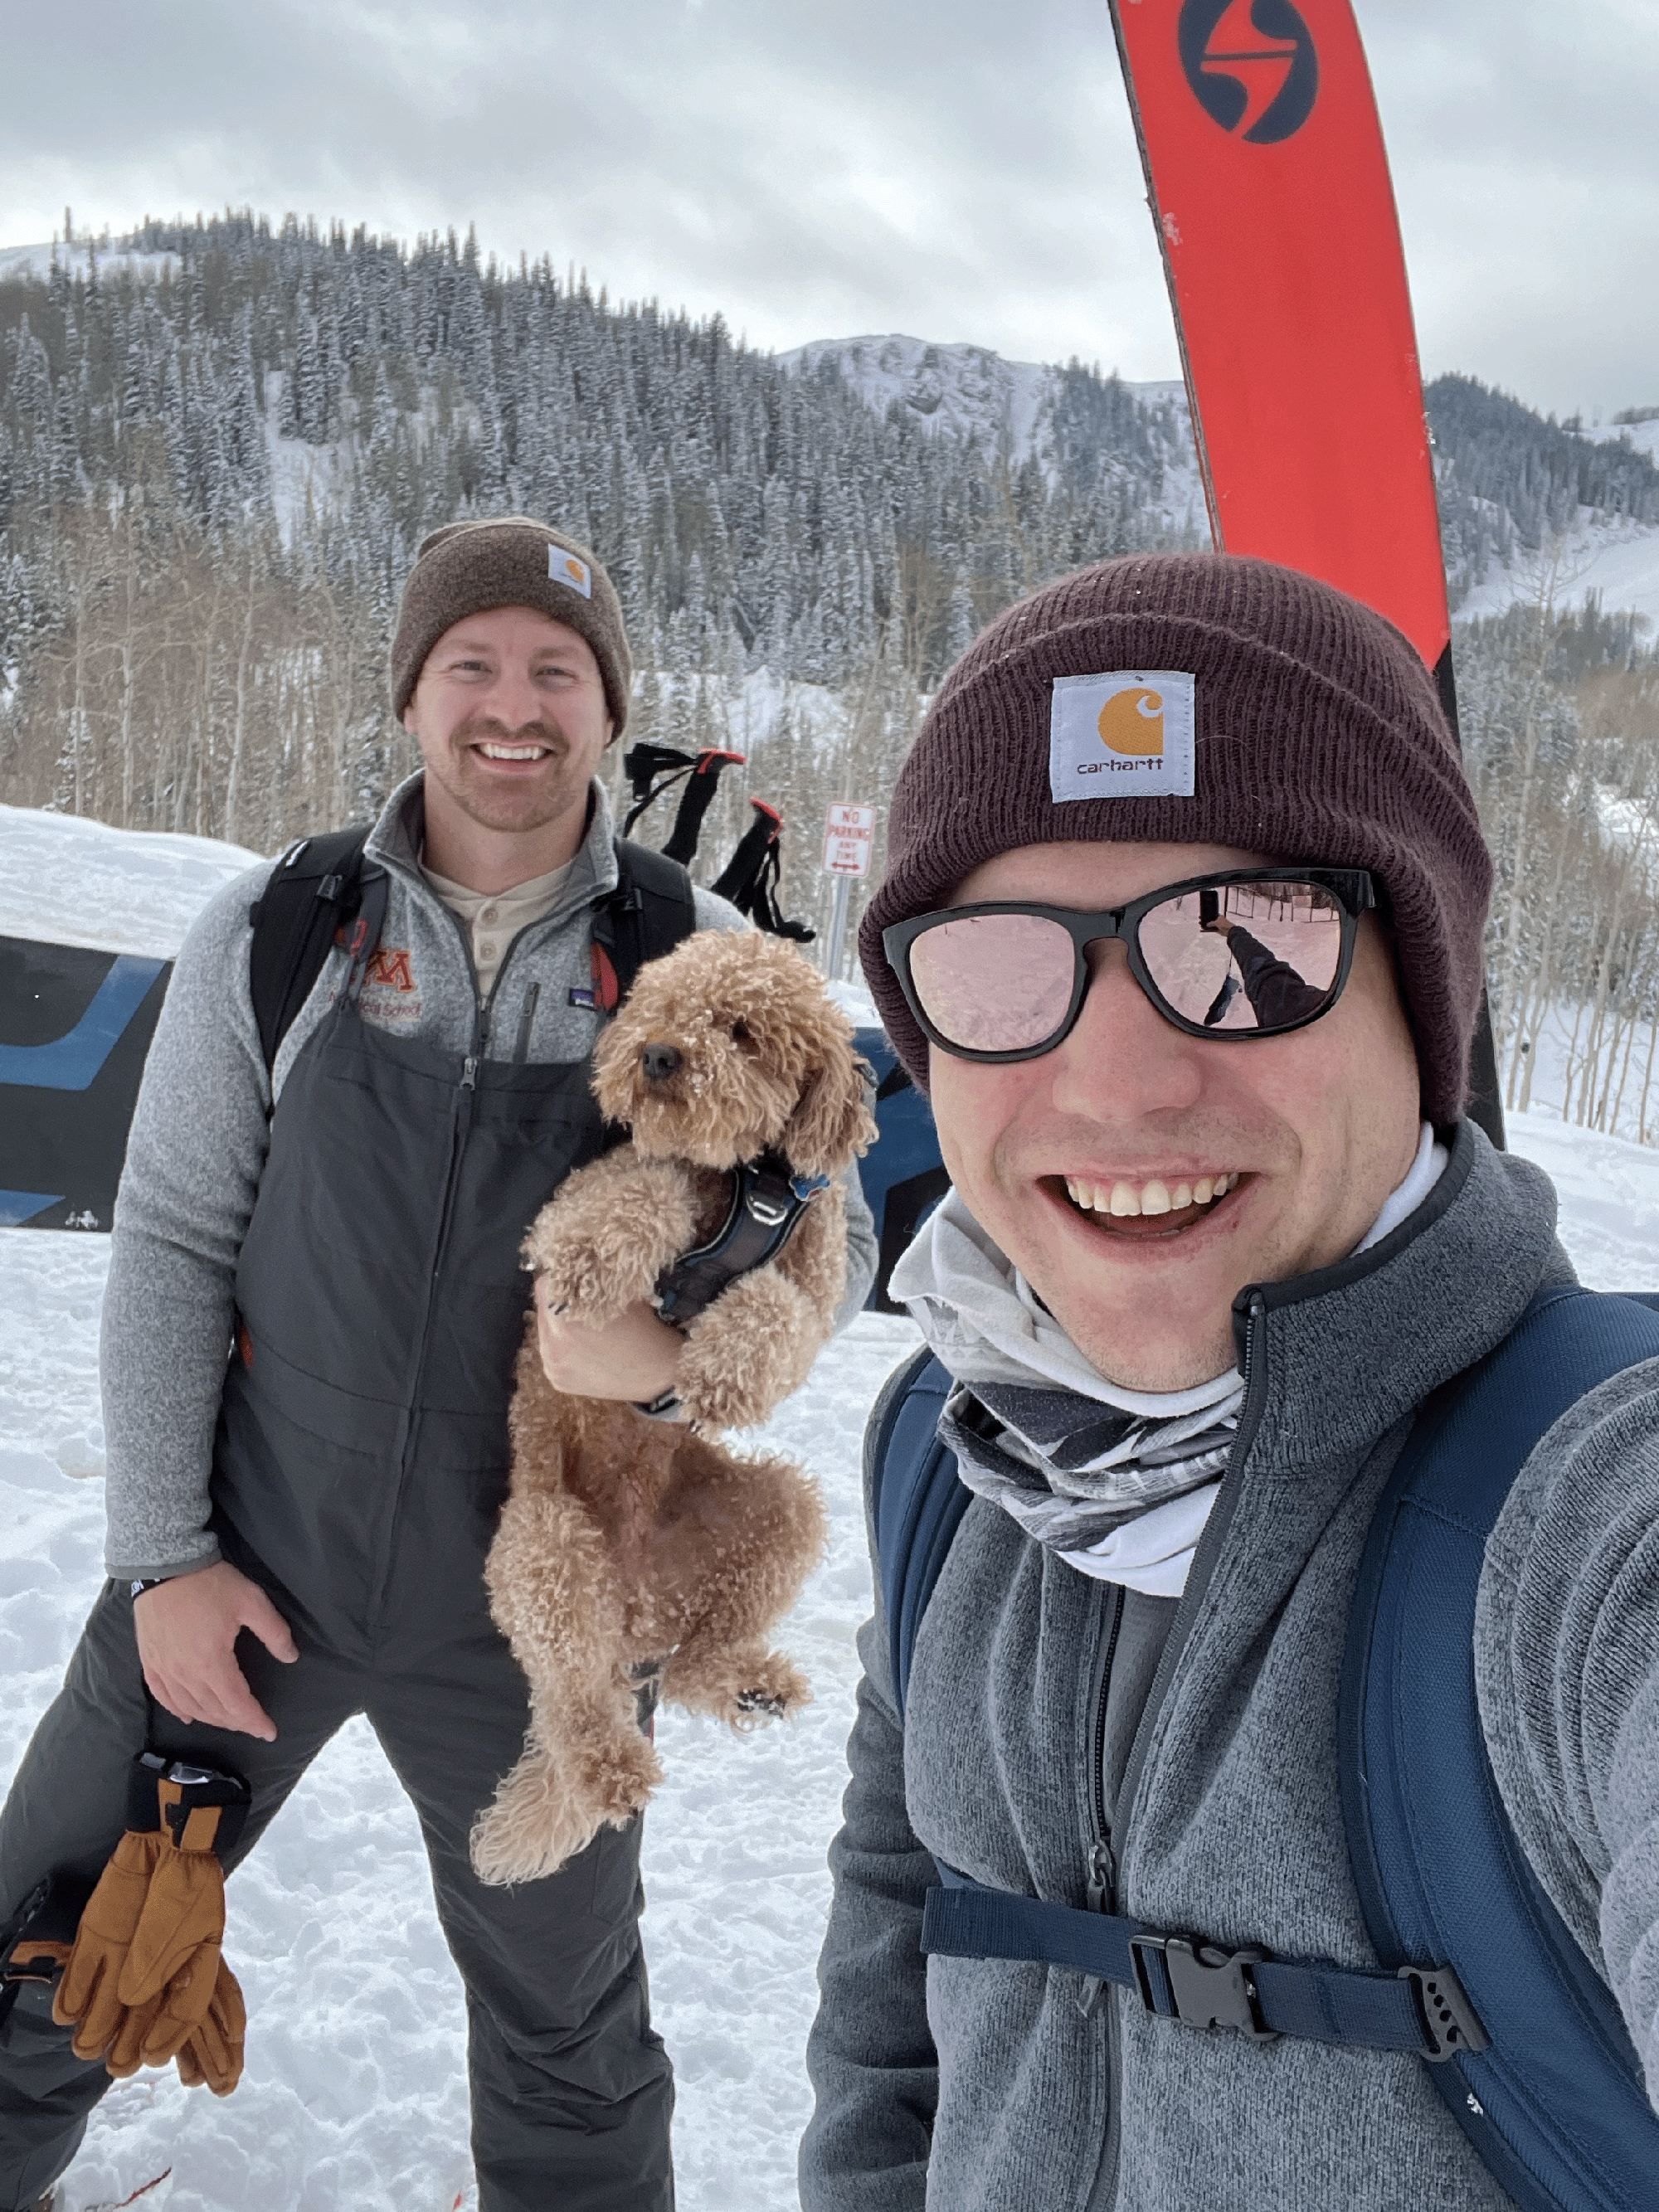 Two people standing in the snow. One has skiis; the other is holding a dog